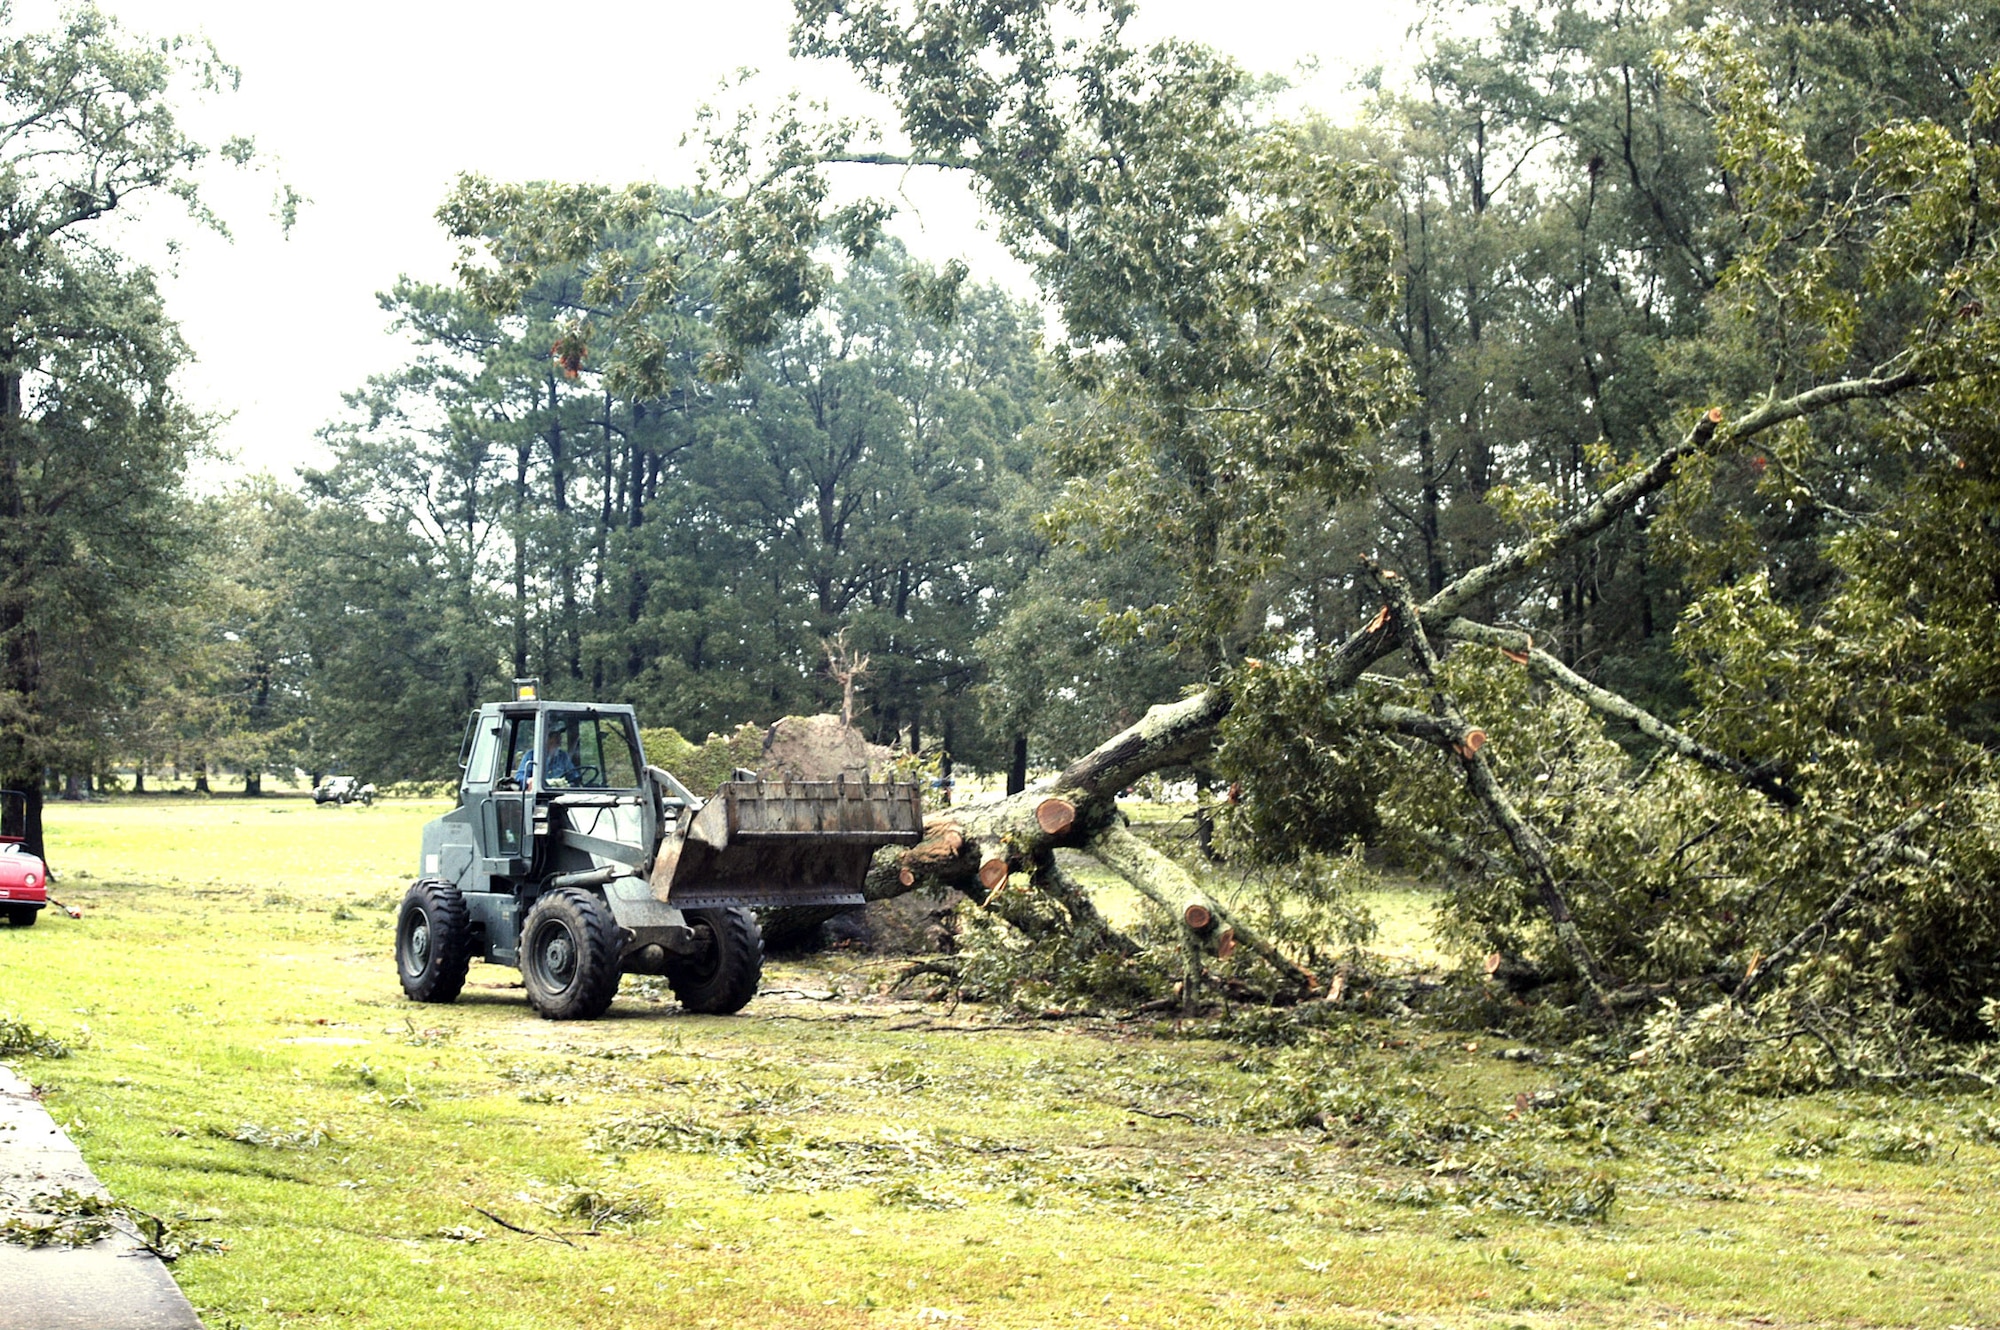 COLUMBUS AIR FORCE BASE, Miss. - People continue cleanup efforts here after Hurricane Katrina passed through Aug. 29.  Although it did not pass directly over the base, the base sustained more than $765,000 in damage.  Maximum winds reached 50 knots.  (U.S. Air Force photo by 2nd Lt. Jeremy Cotton)